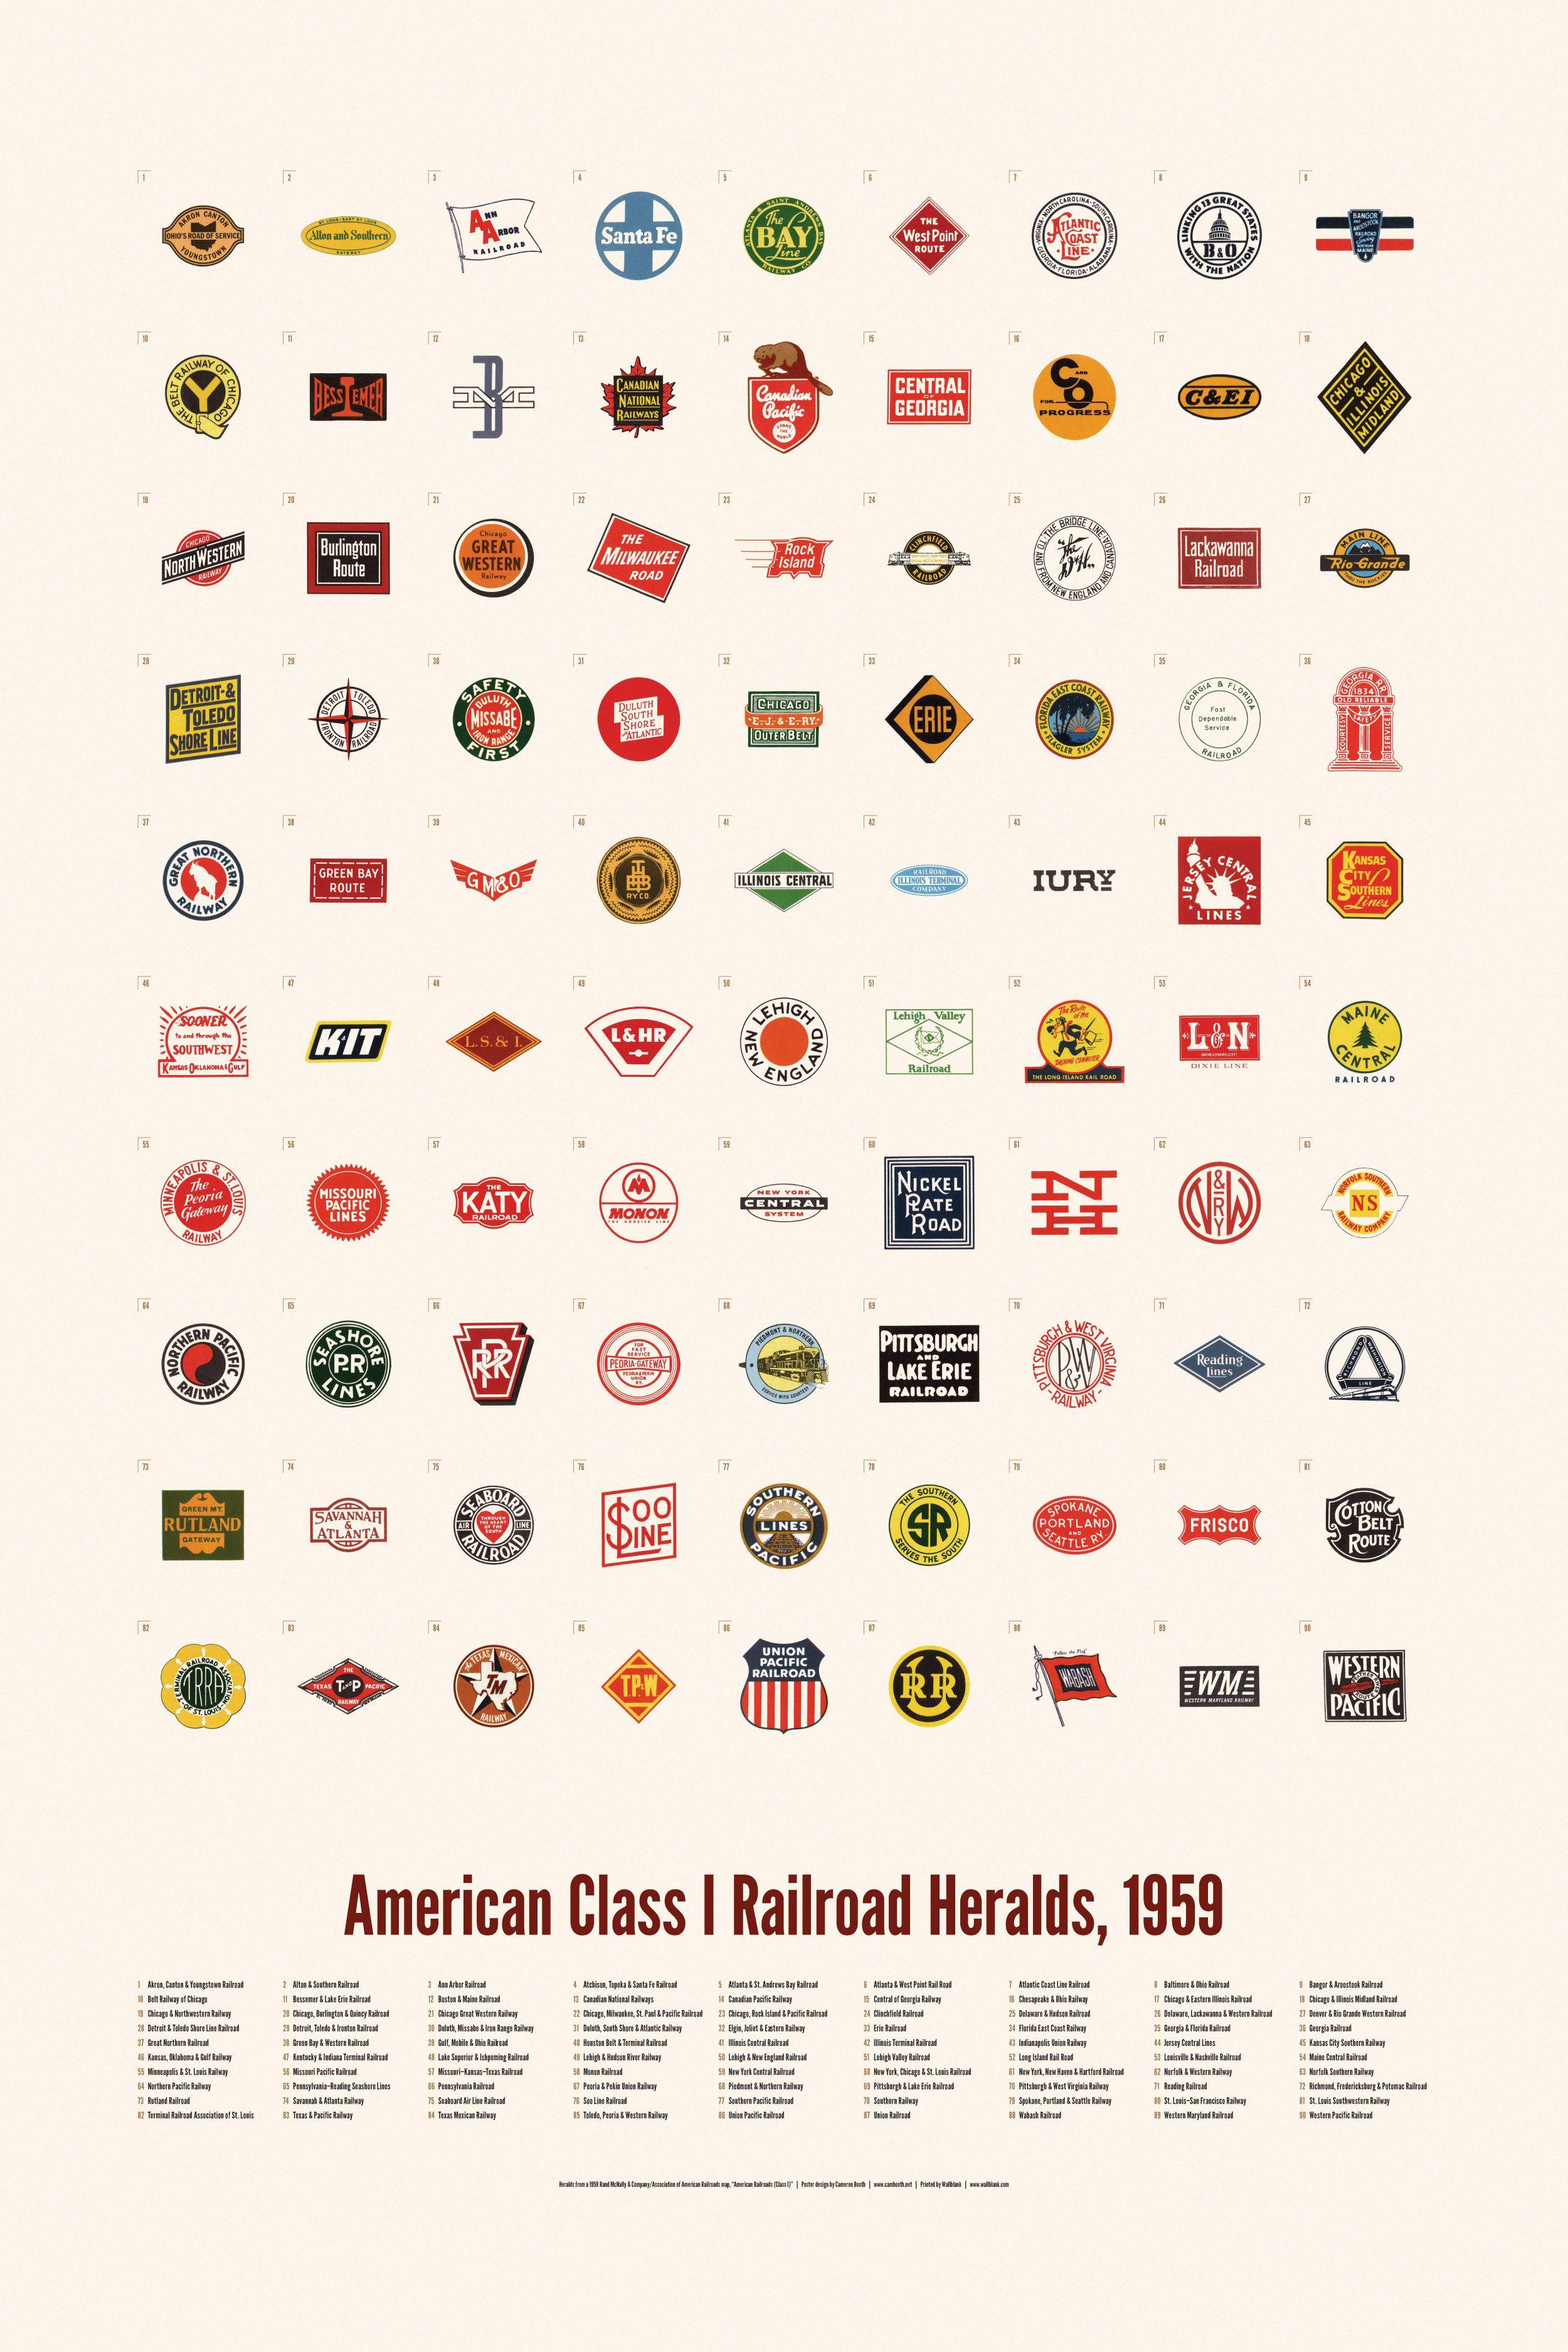 Vintage Railroad Logo - Project: American Class I Railroad Heralds, 1959 – Cameron Booth